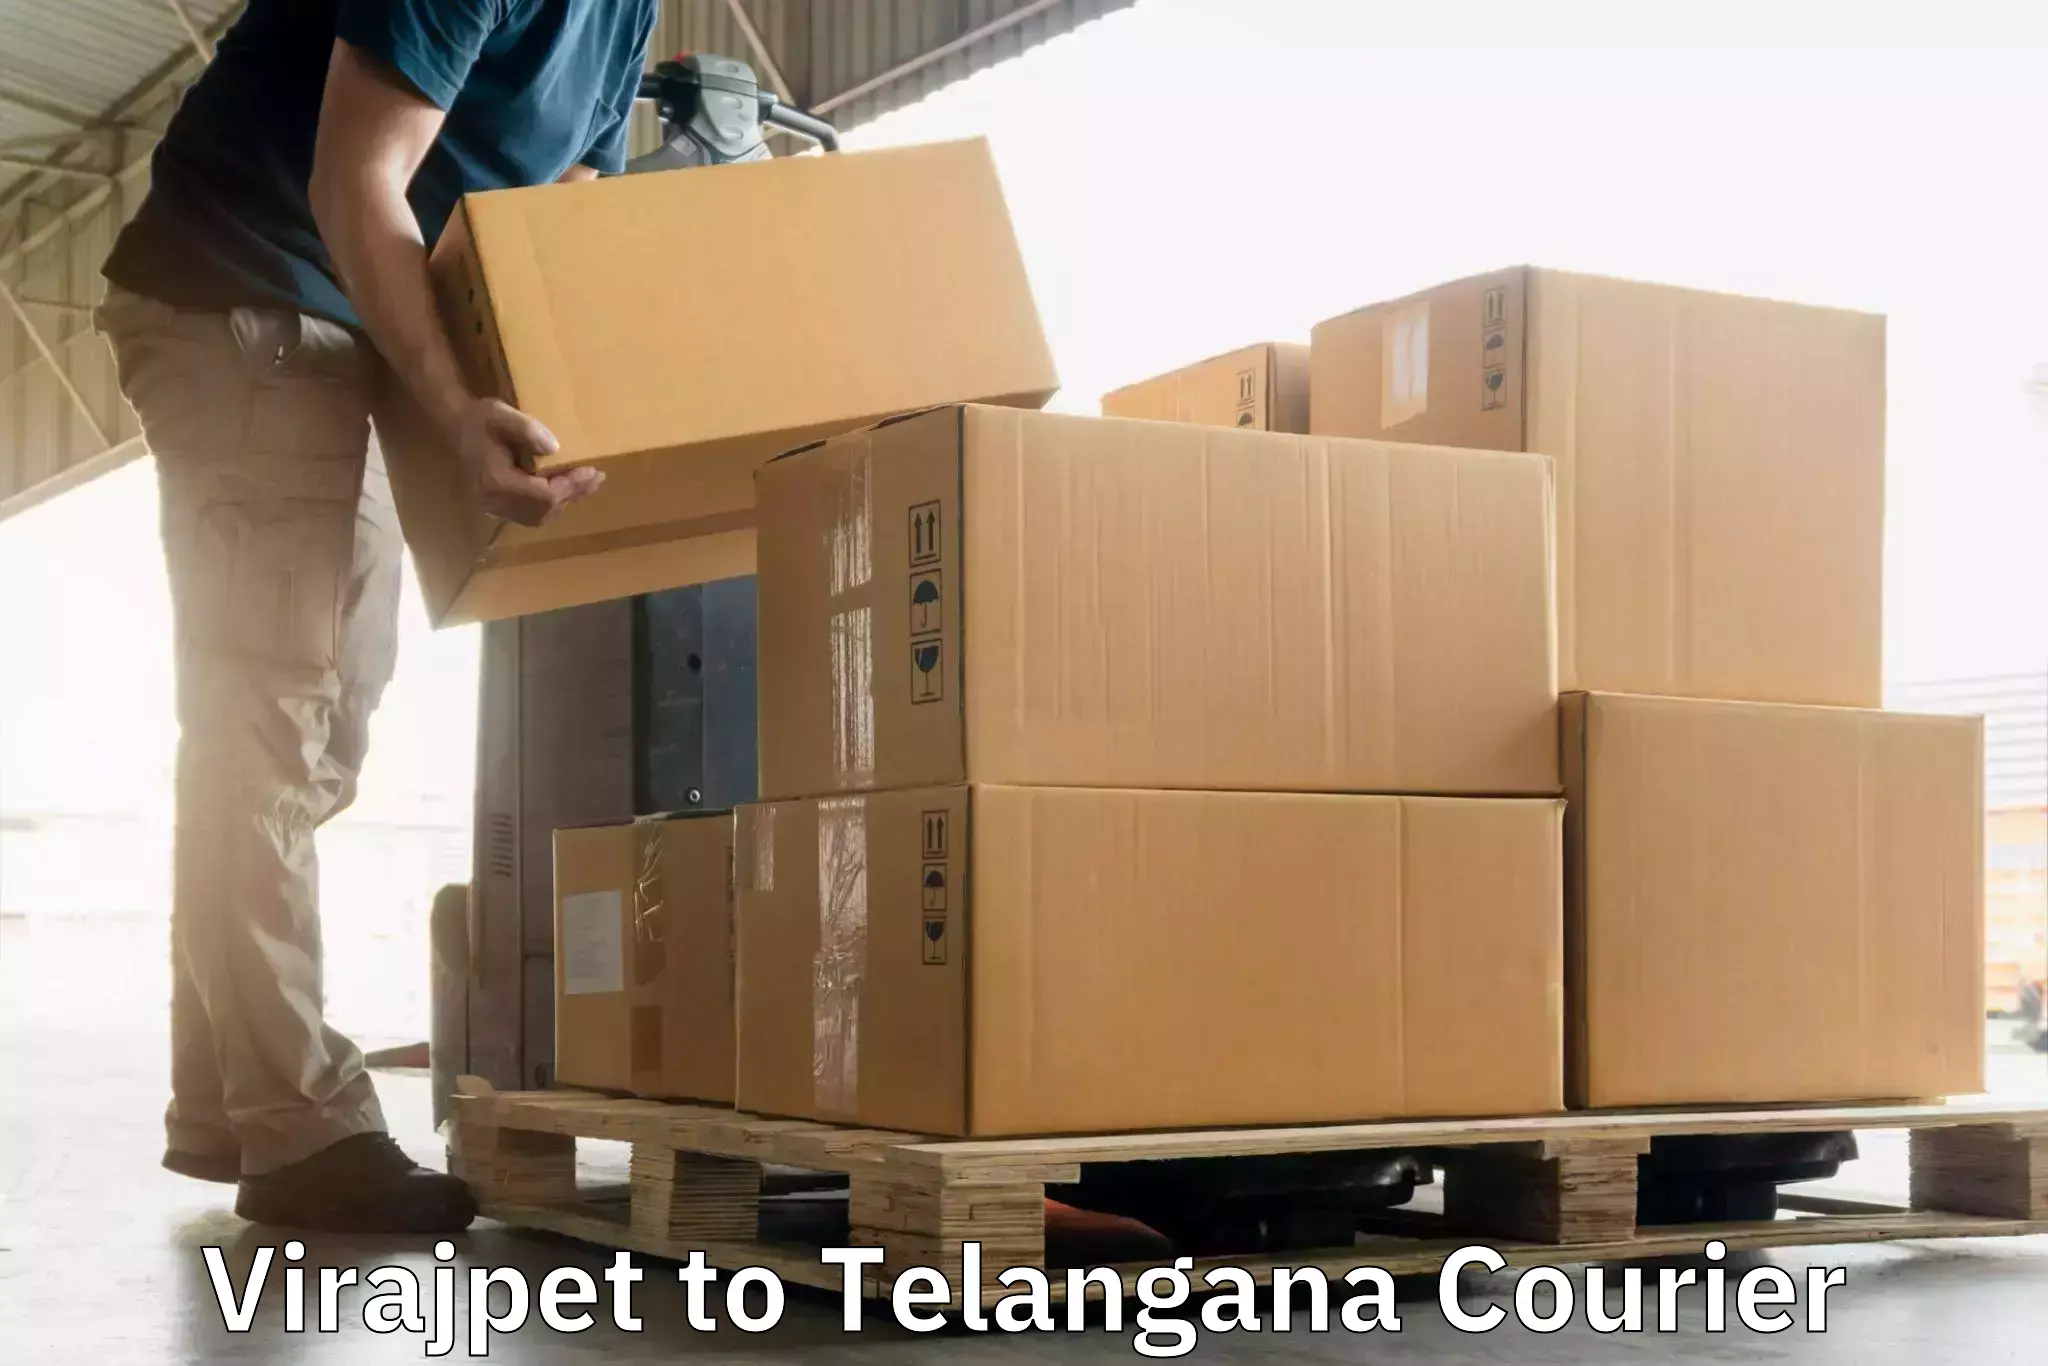 Efficient parcel delivery Virajpet to Manthani